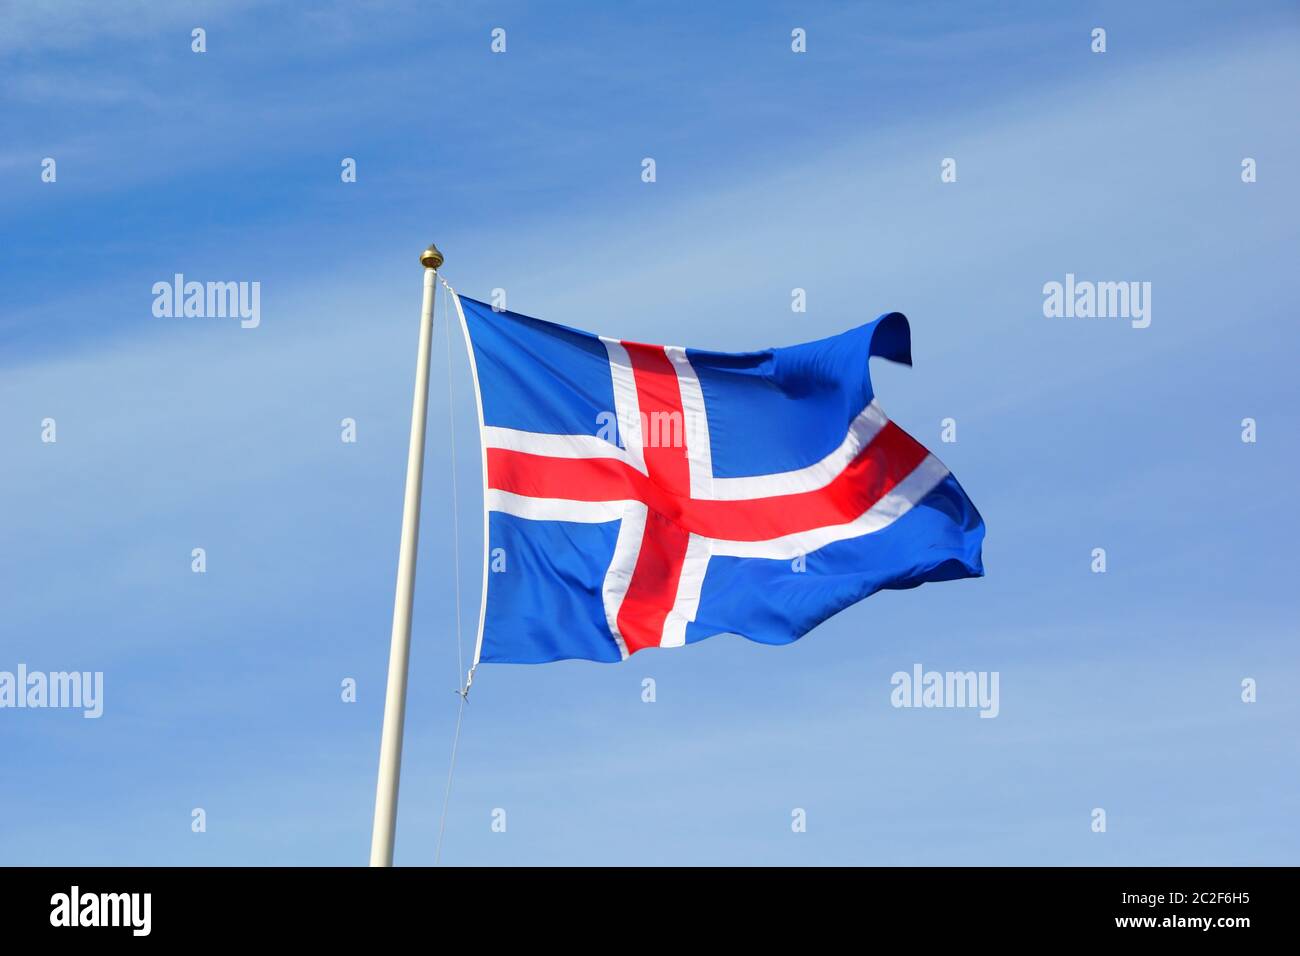 Proudly flying flag against a blue sky Stock Photo